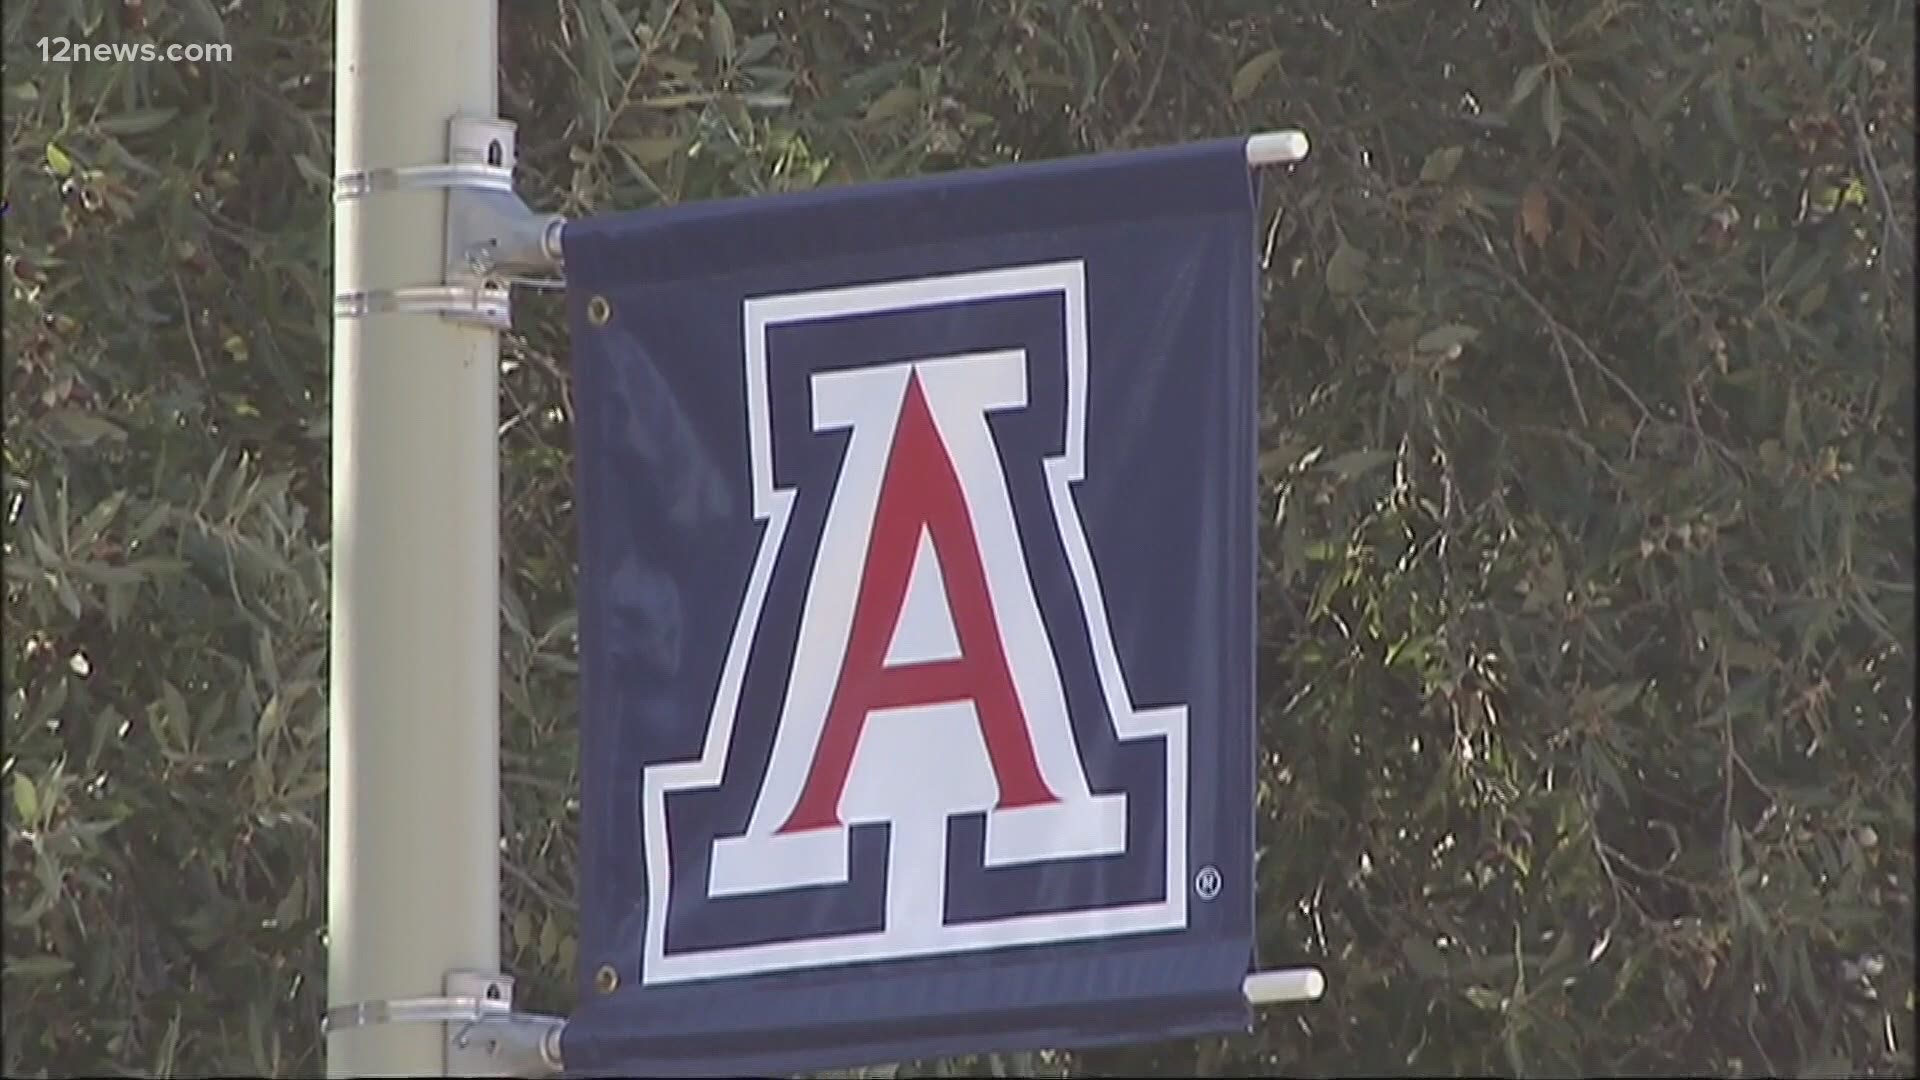 The University of Arizona is asking all students to quarantine for the next two weeks. The recommendation comes from the Pima County Public Health Department.